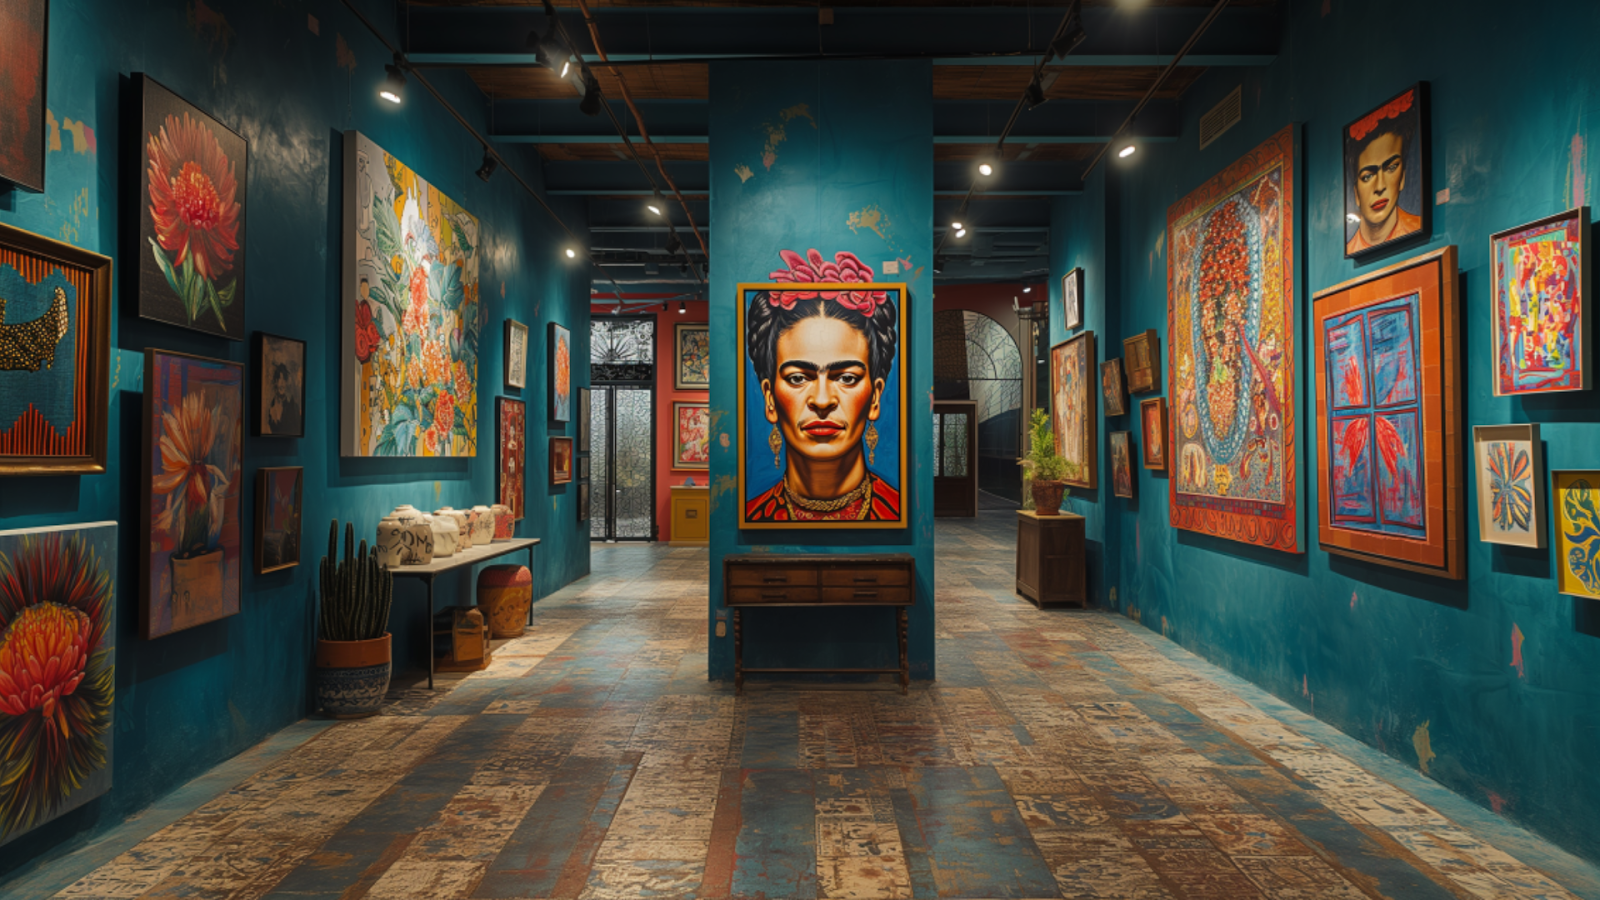 Inside the Frida Kahlo Museum with colorful artworks